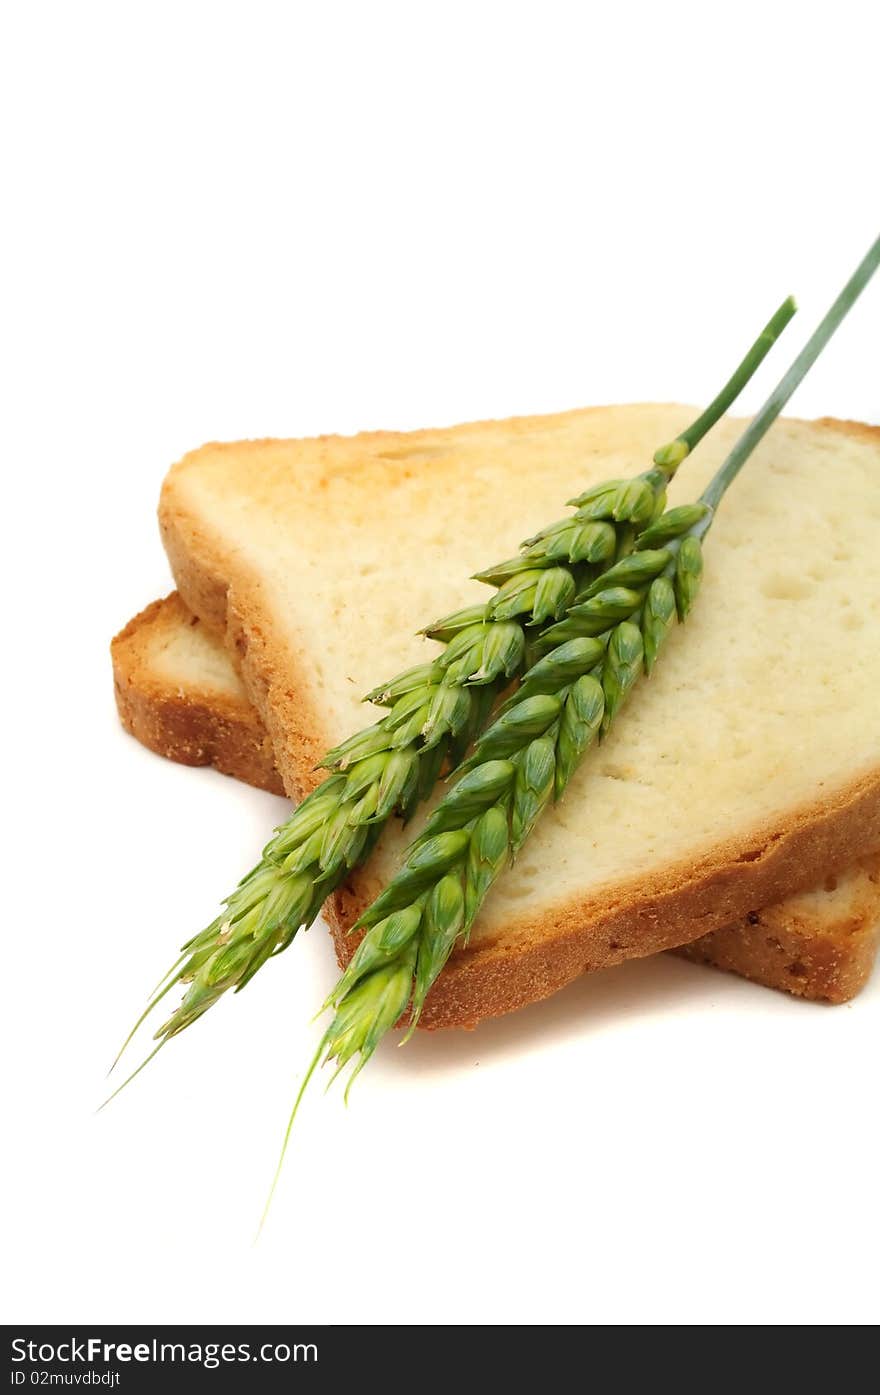 Wheat toasts with ears of wheat on a white background